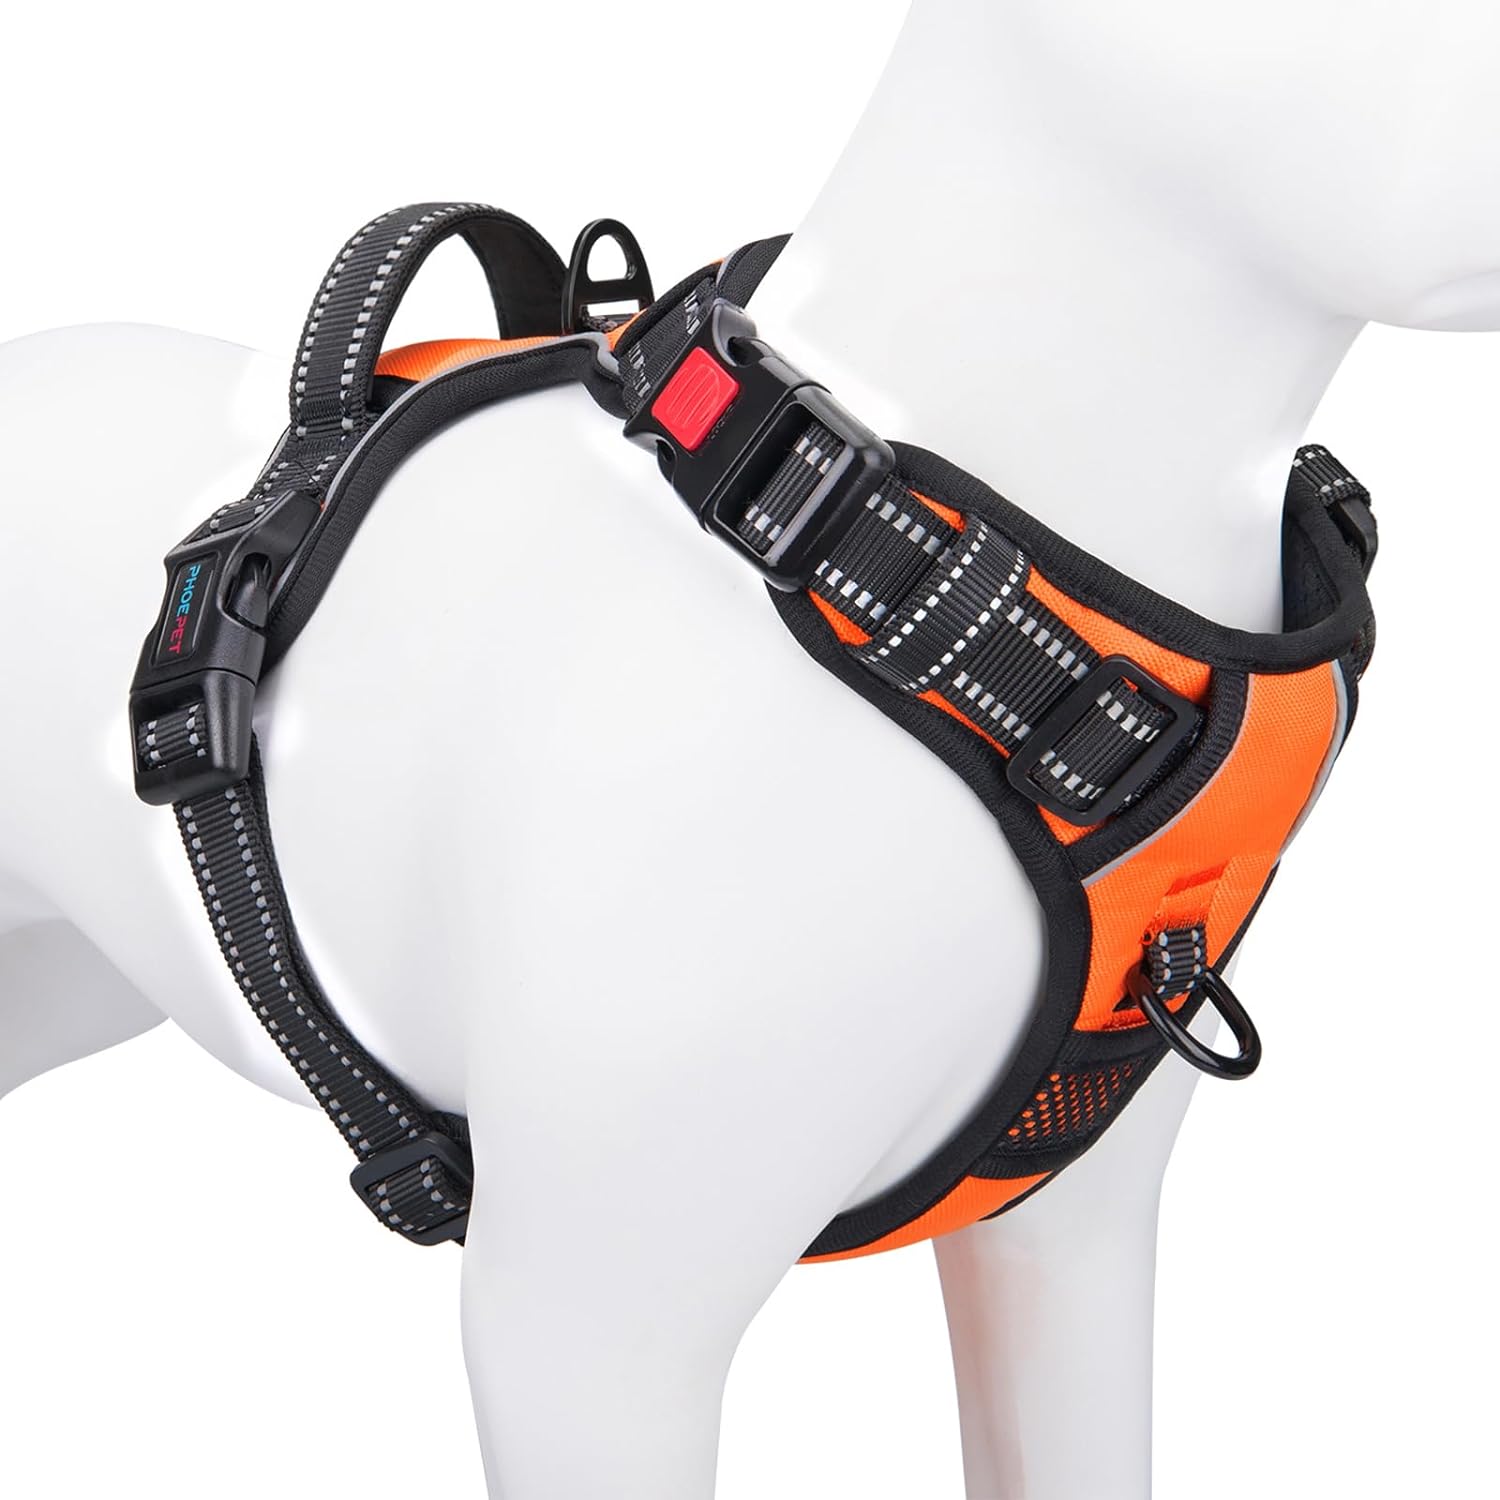 PHOEPET No Pull Dog Harness Medium Reflective Front Clip Vest with Handle,Adjustable 2 Metal Rings 3 Buckles,[Easy to Put on  Take Off](M, Orange)